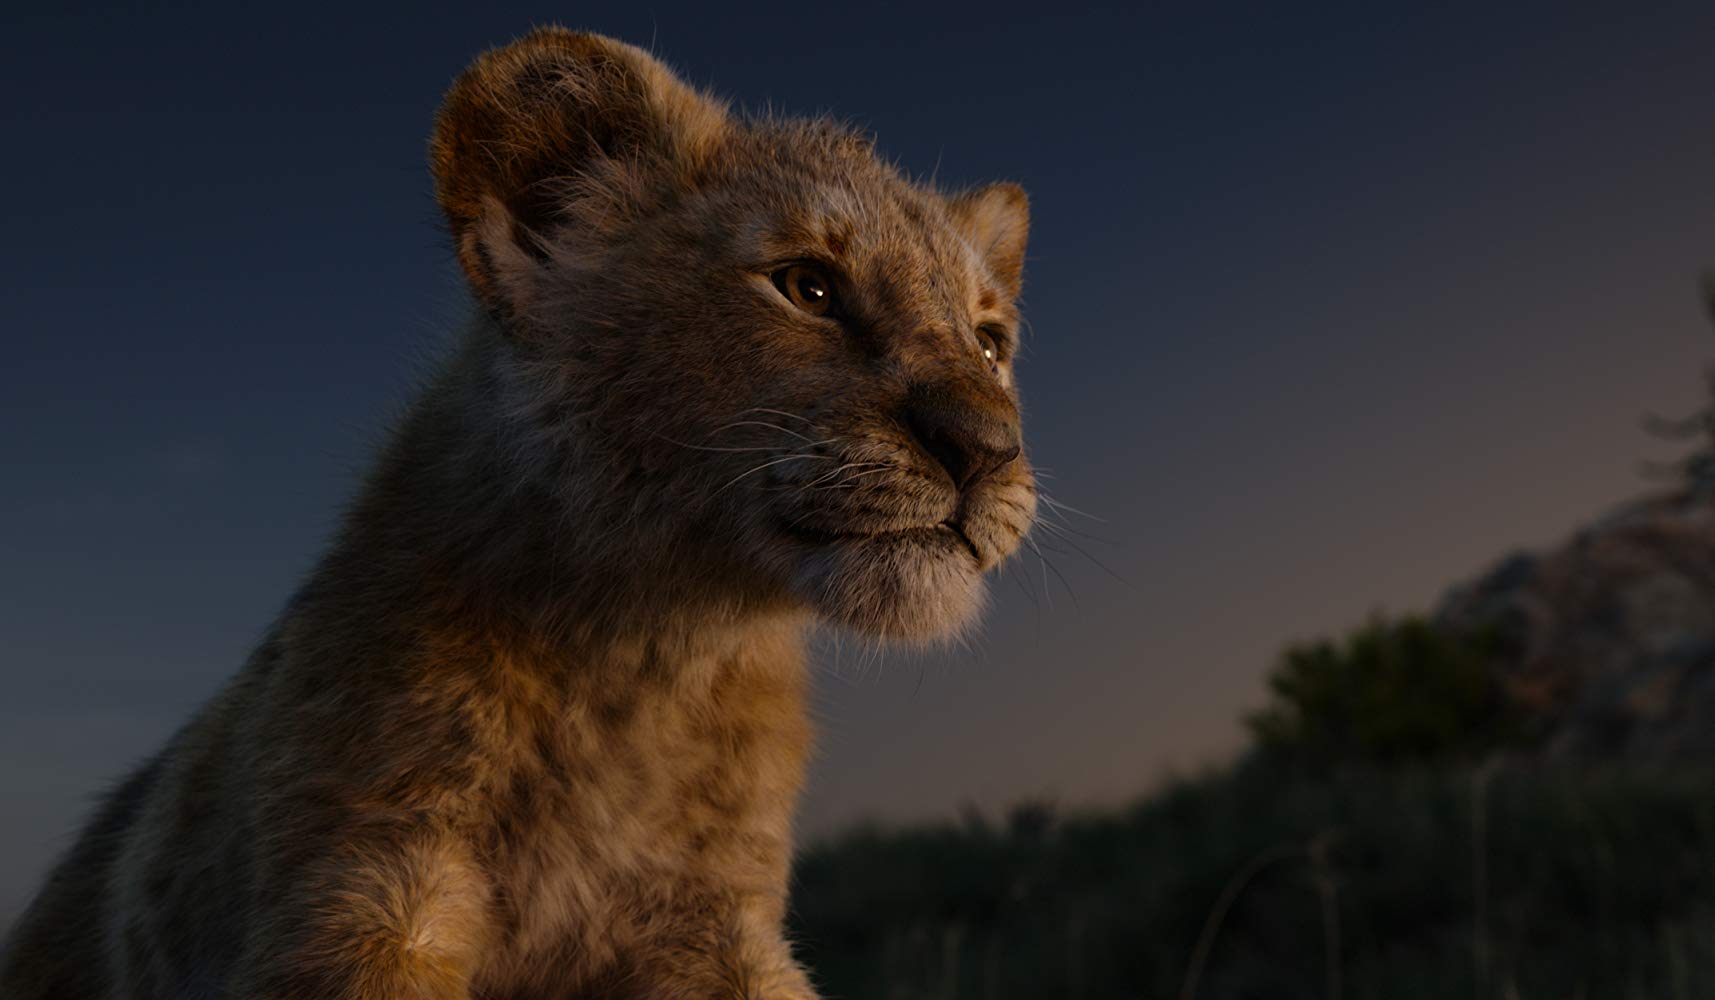 THE LION KING Is Visually Impressive, But Feels Logy